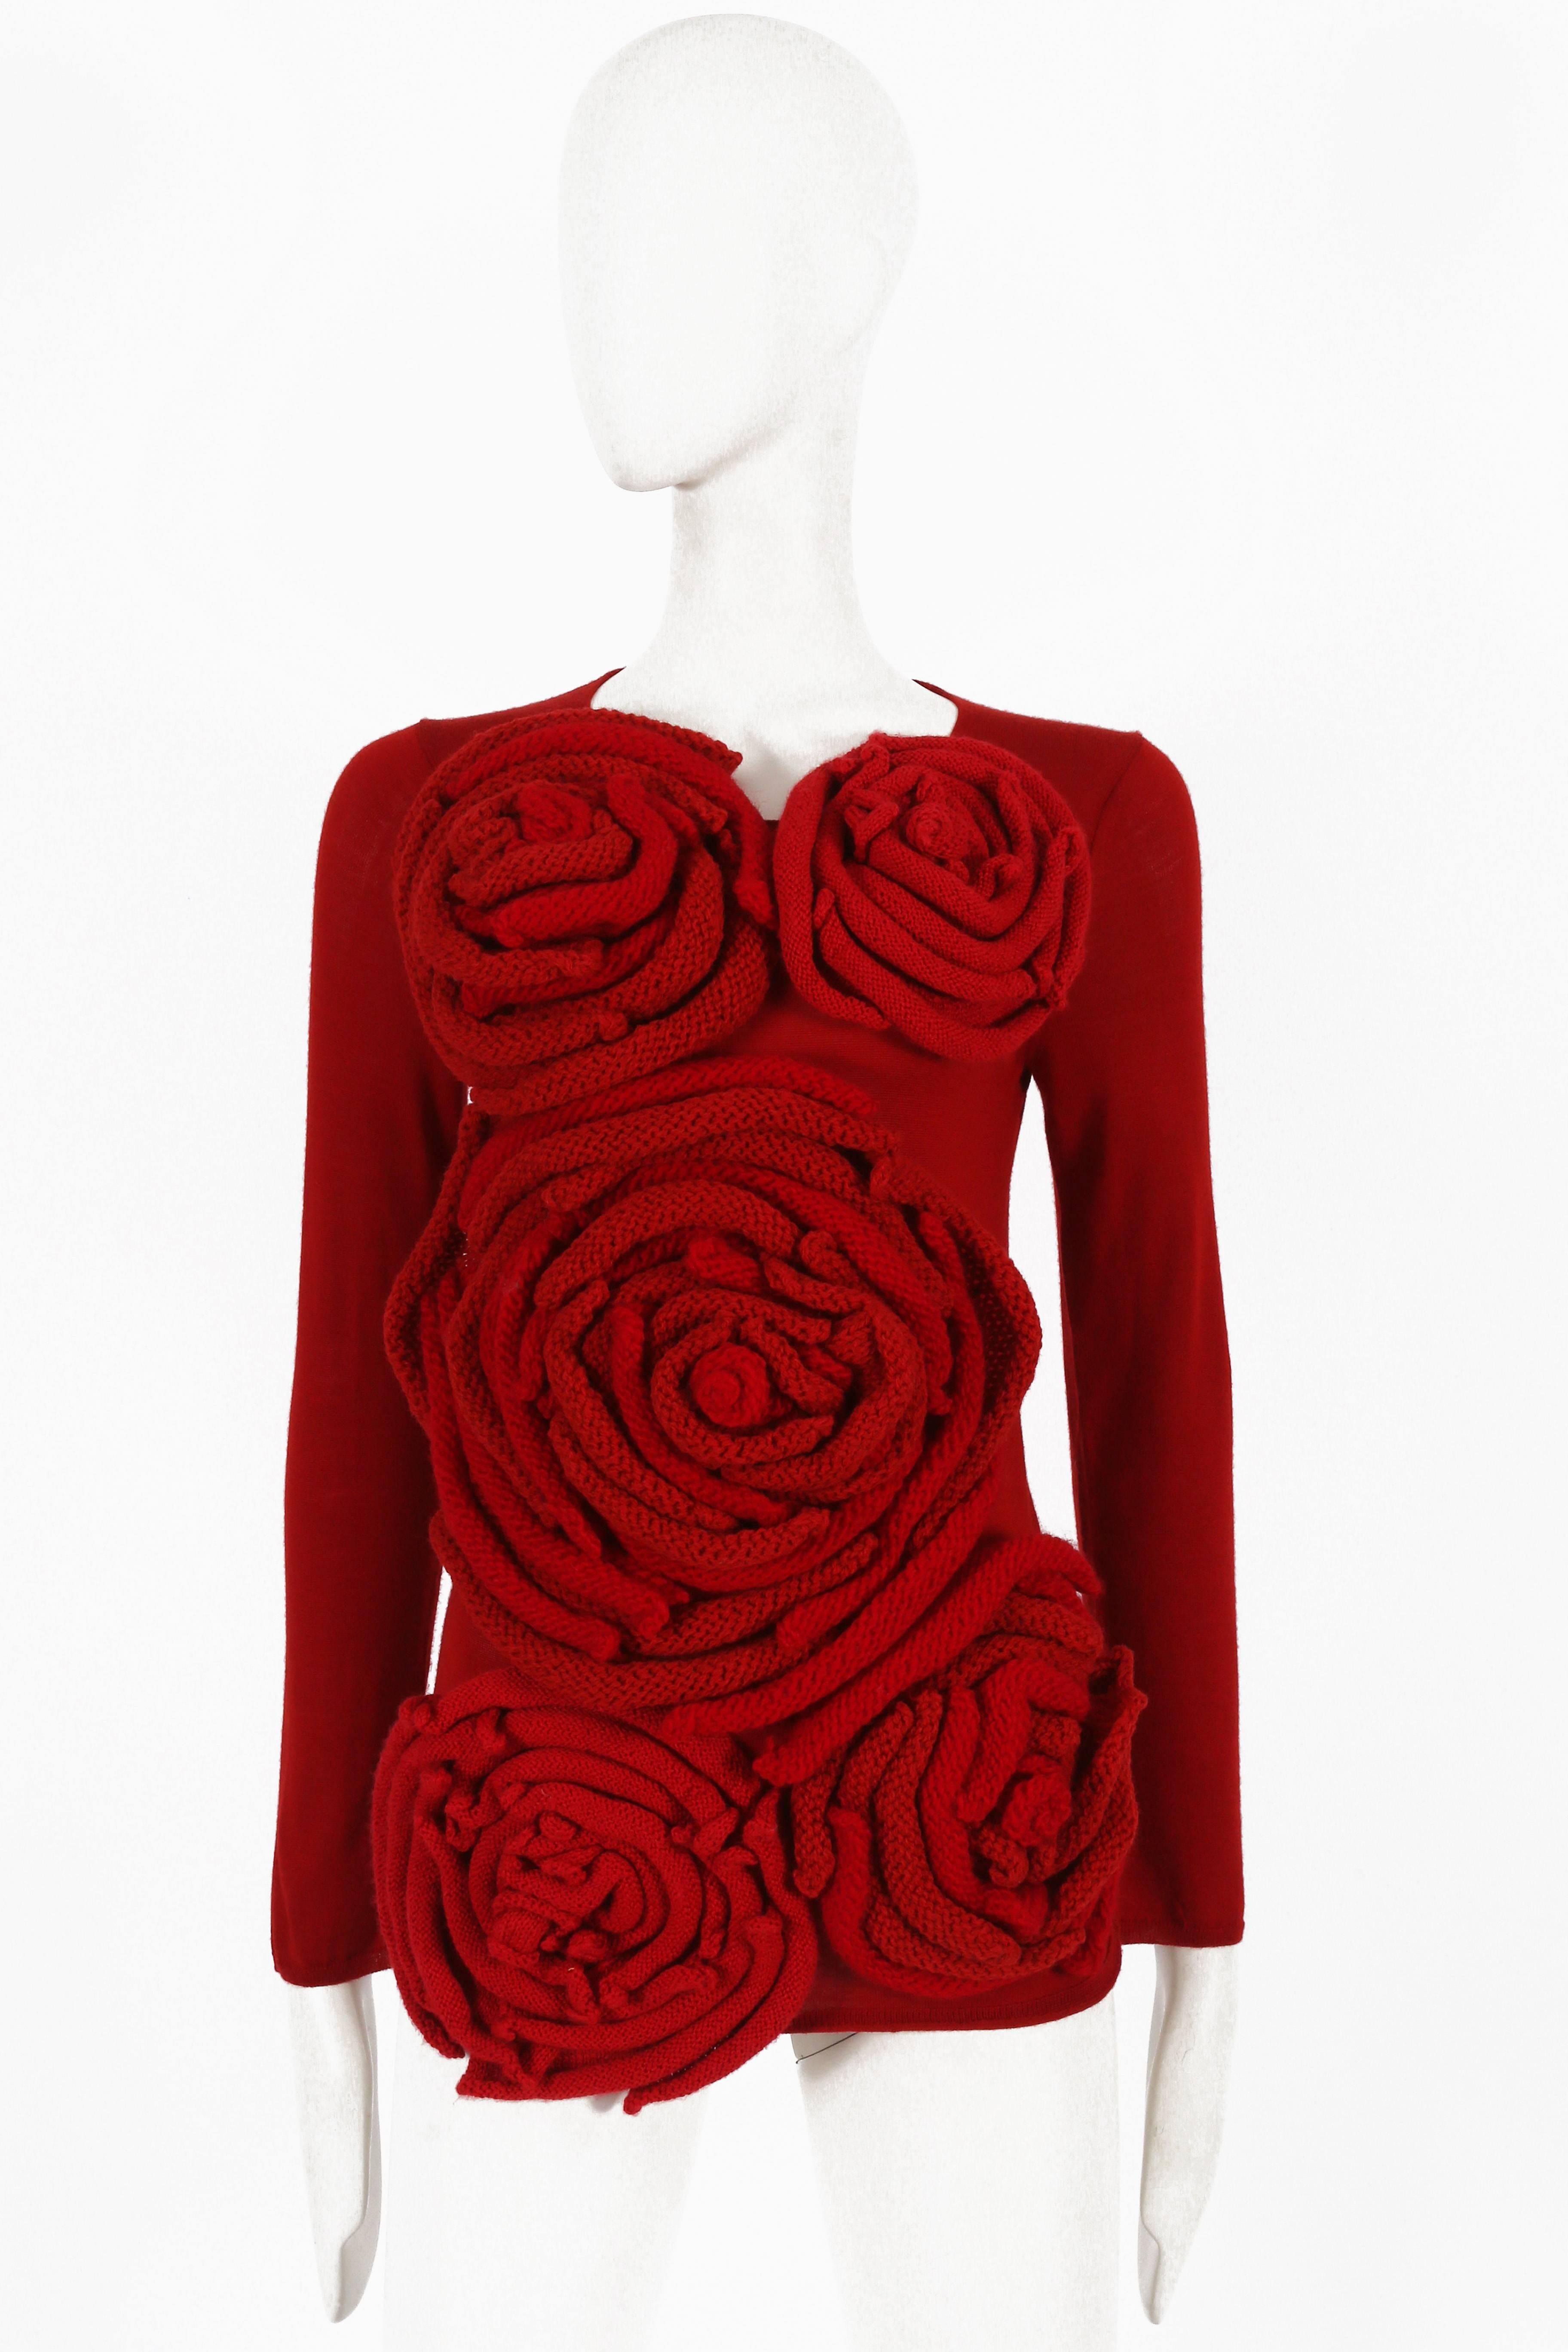 Presenting a striking Comme des Garçons red knitted sweater adorned with large knit appliques resembling roses, a standout piece from the 2014 collection. This sweater showcases the brand's distinctive and artistic approach to knitwear.

The rich